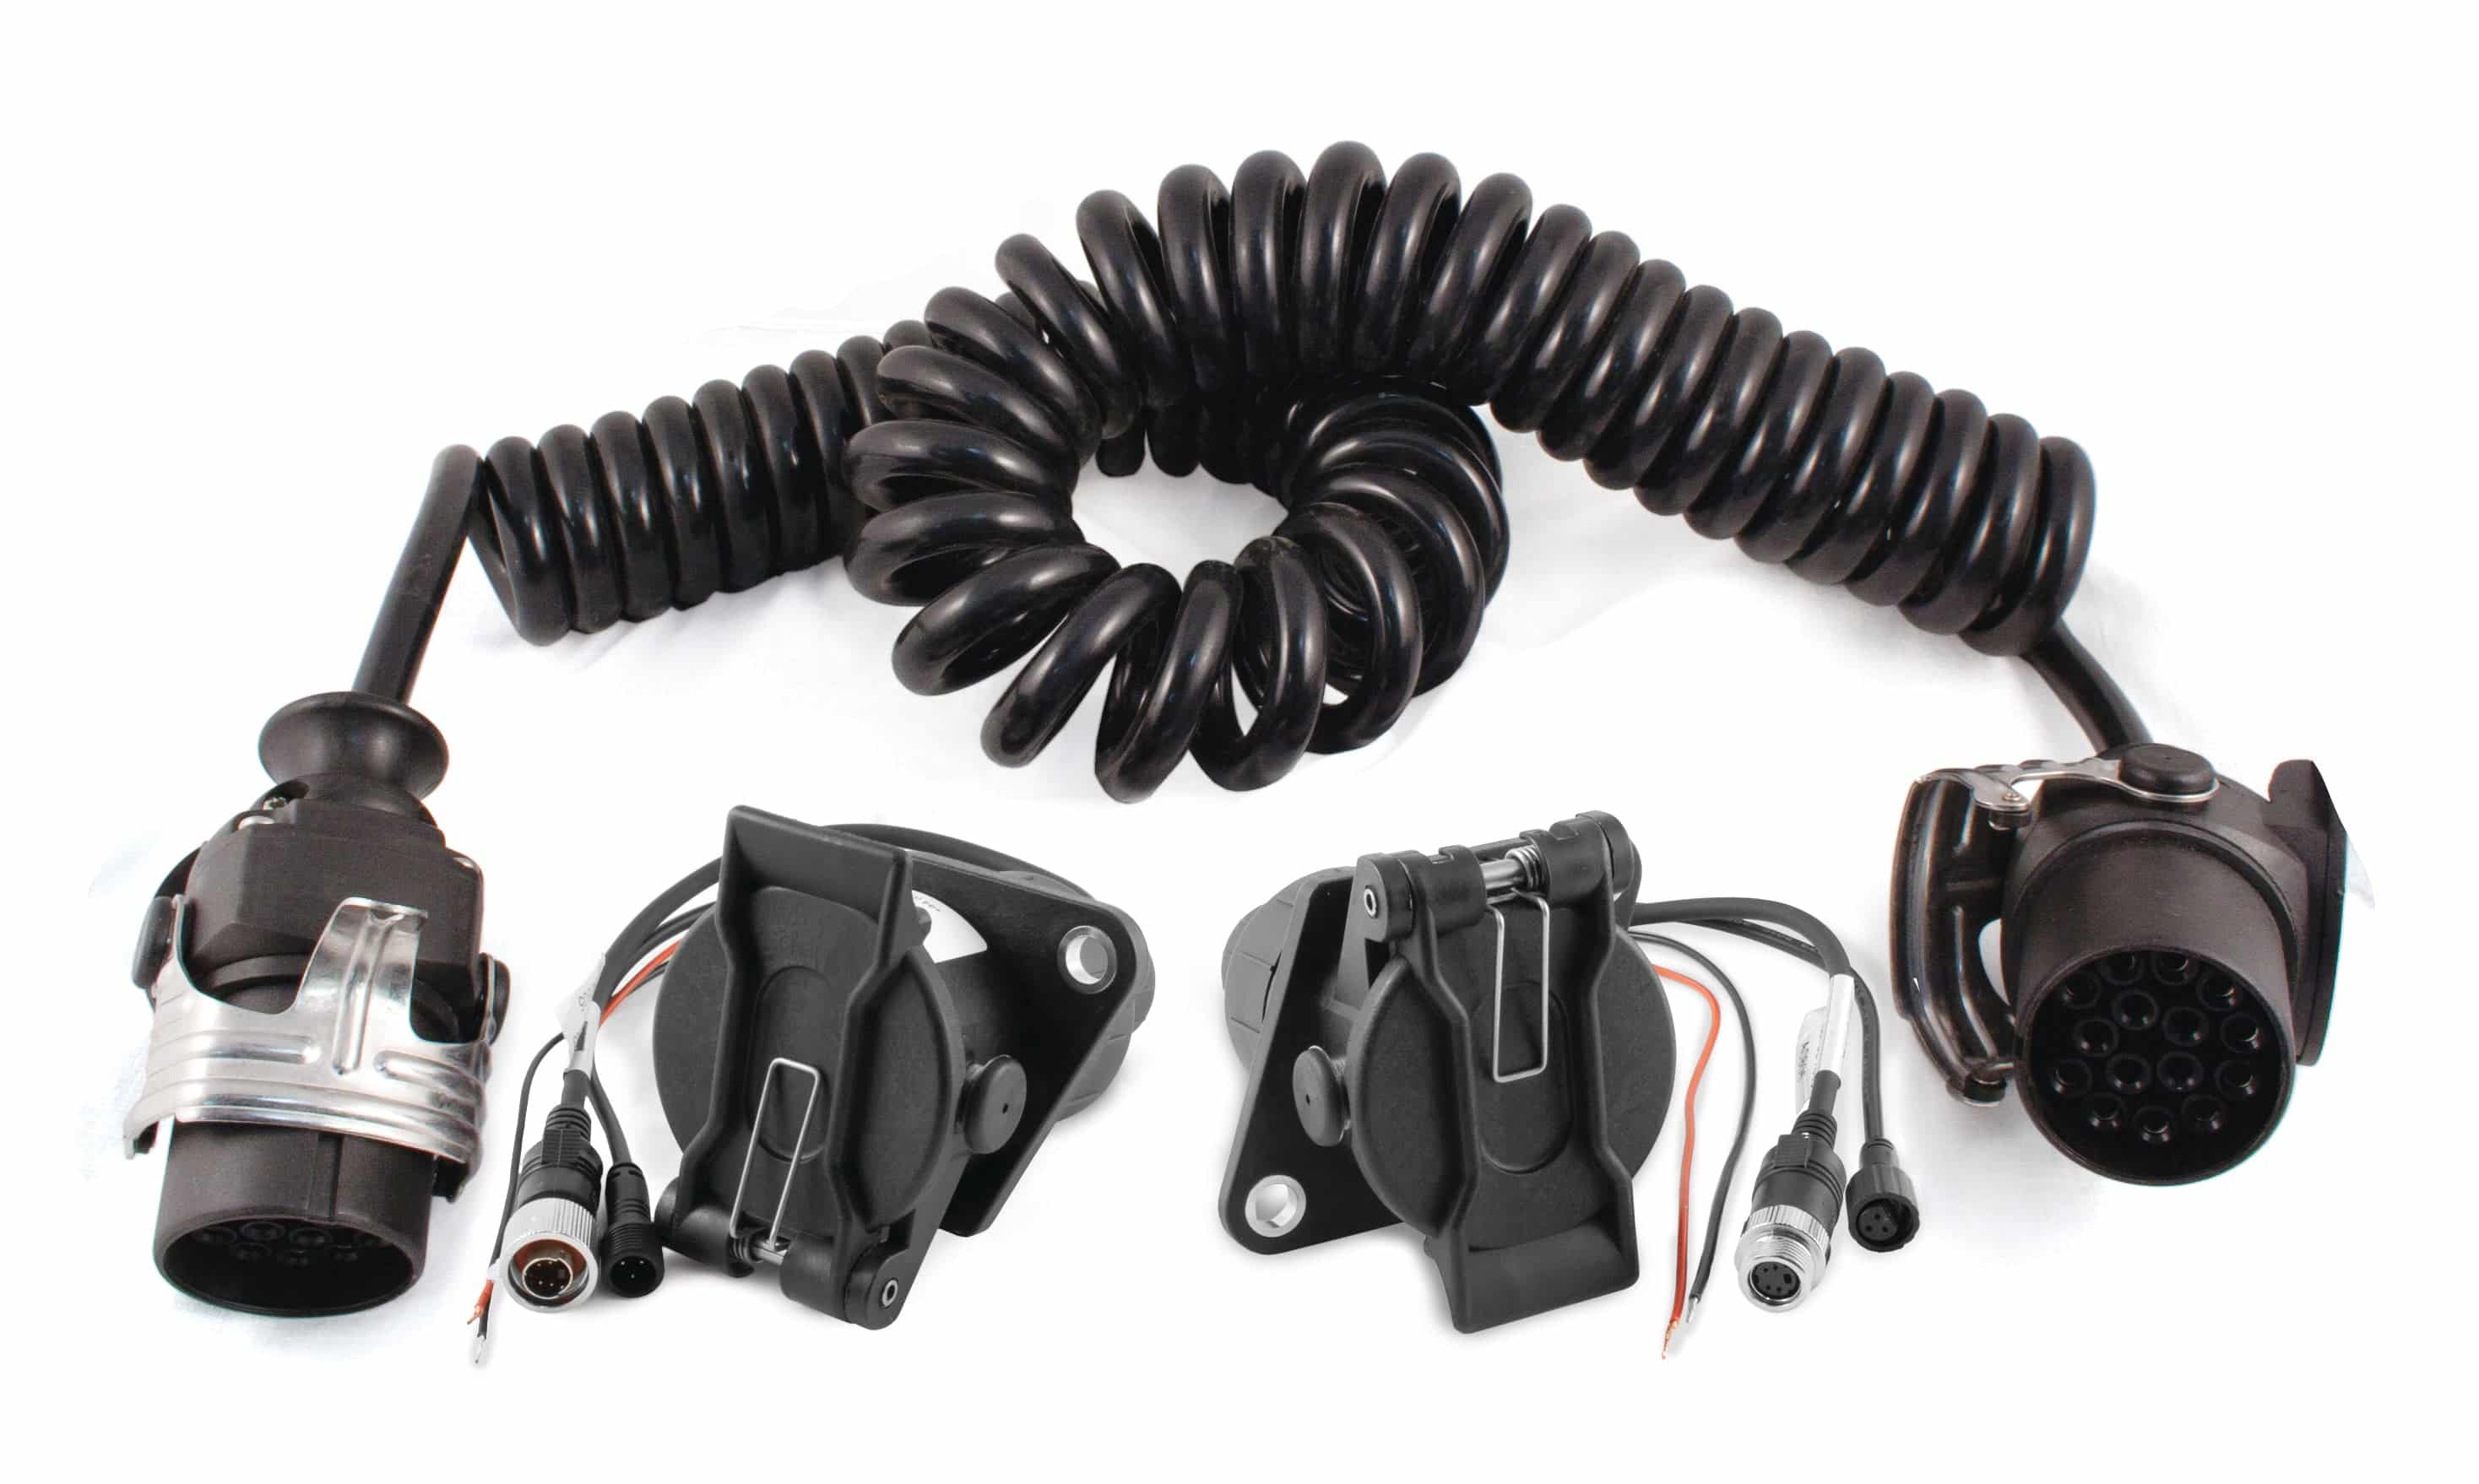 Truck/Trailer camera/sensor cable kit for ultrasonic systems